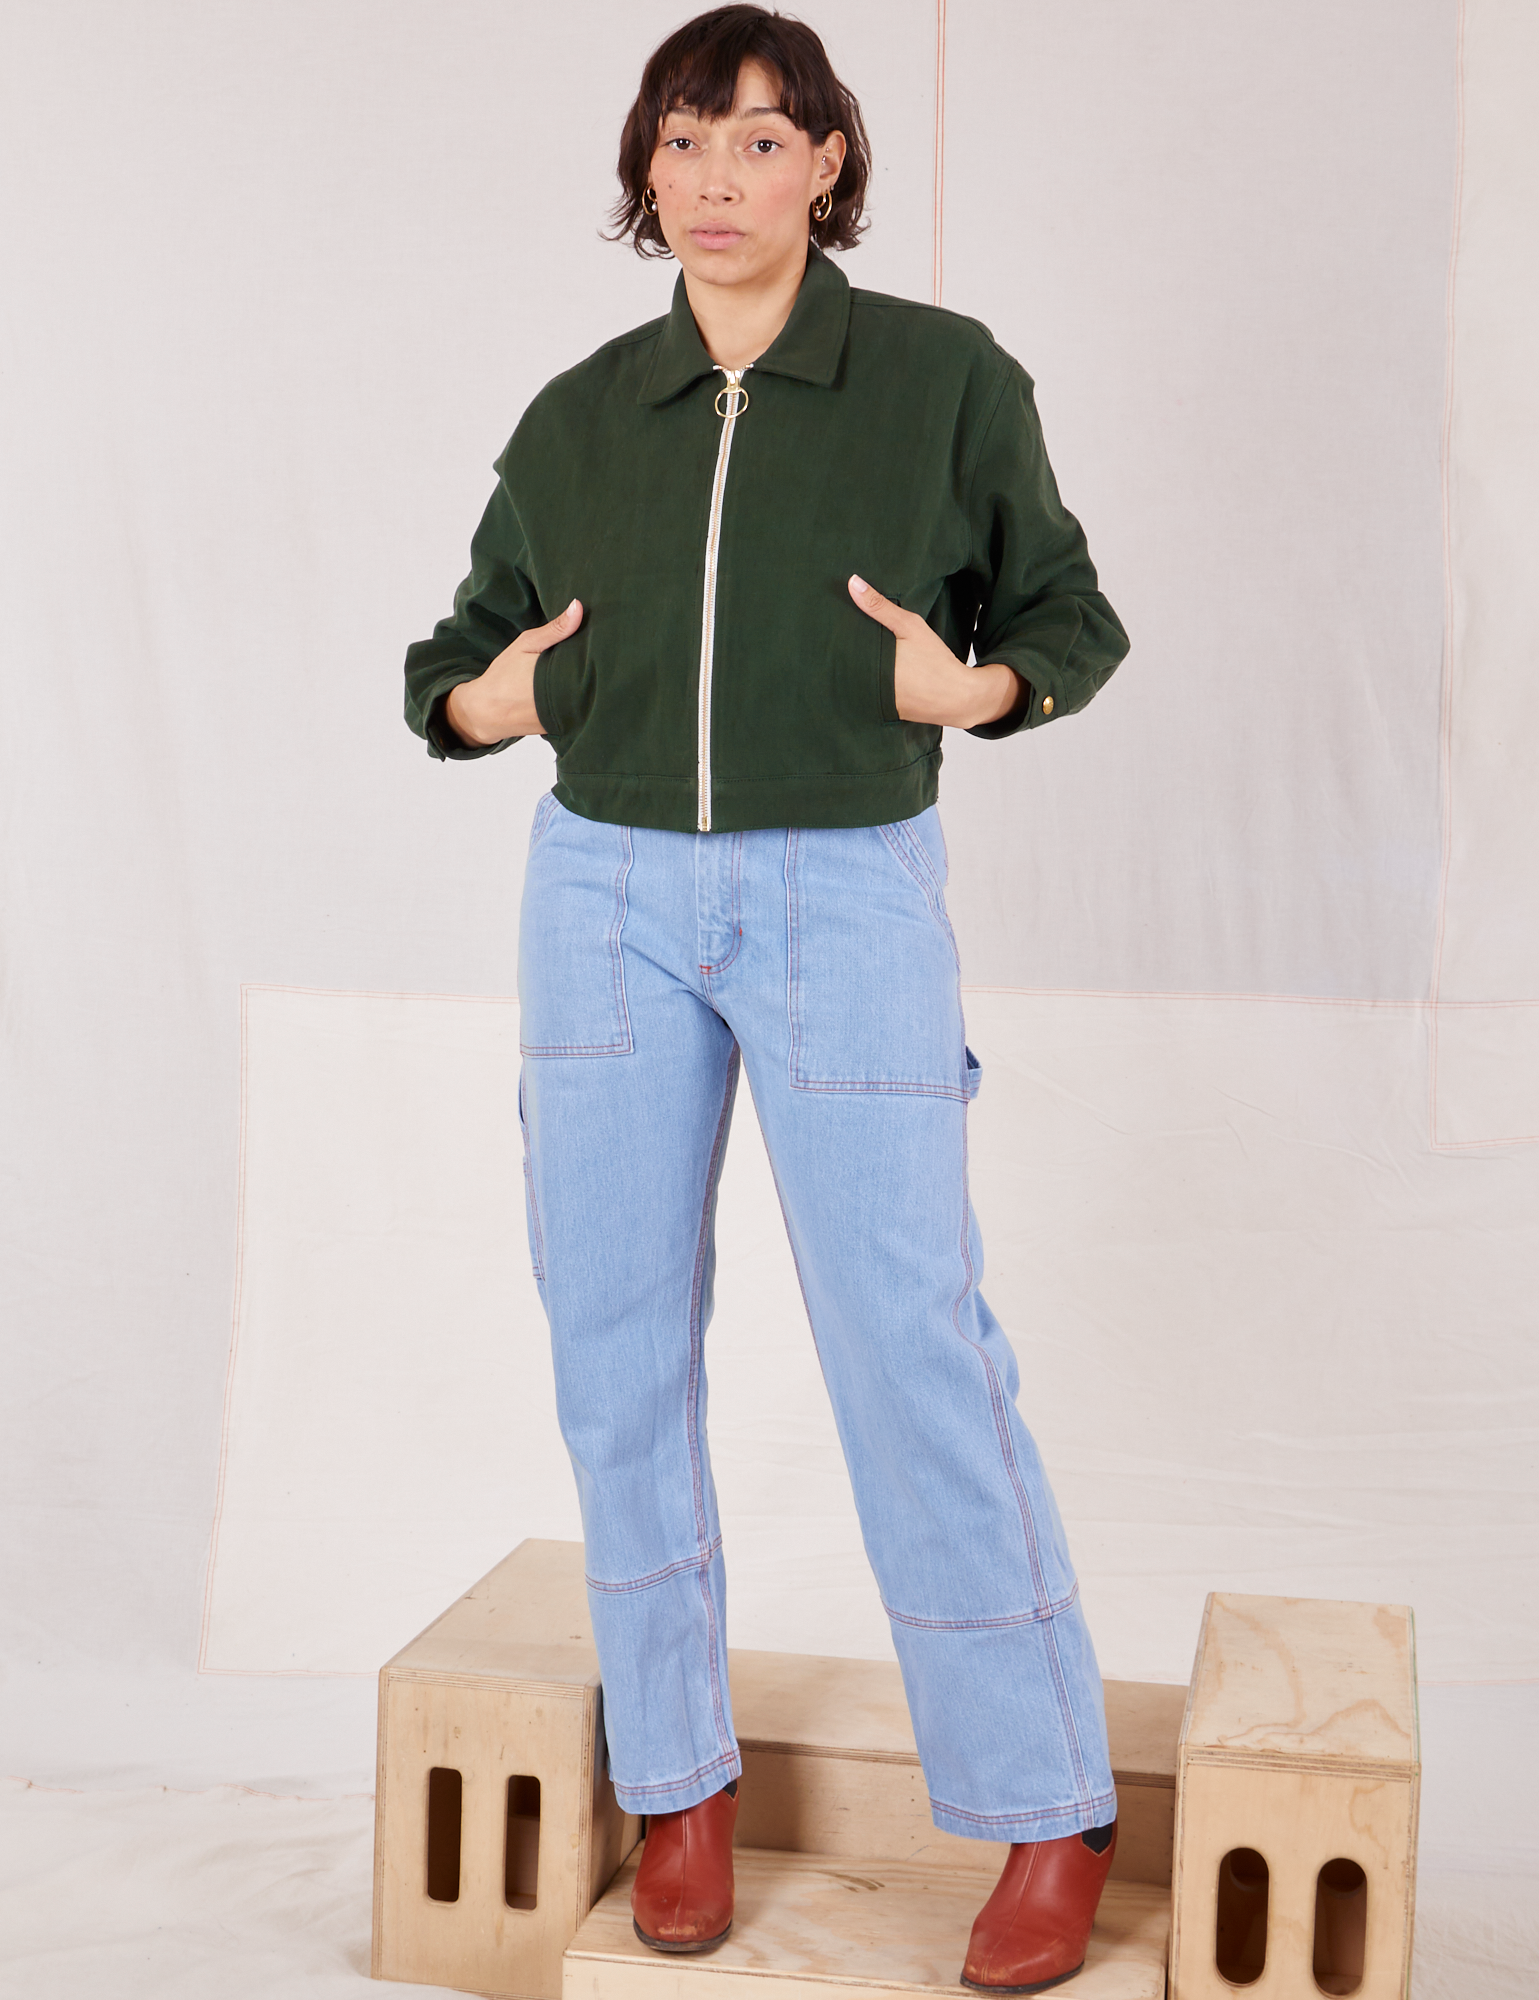 Tiara is wearing a zipped up Ricky Jacket in Swamp Green and light wash Carpenter Jeans